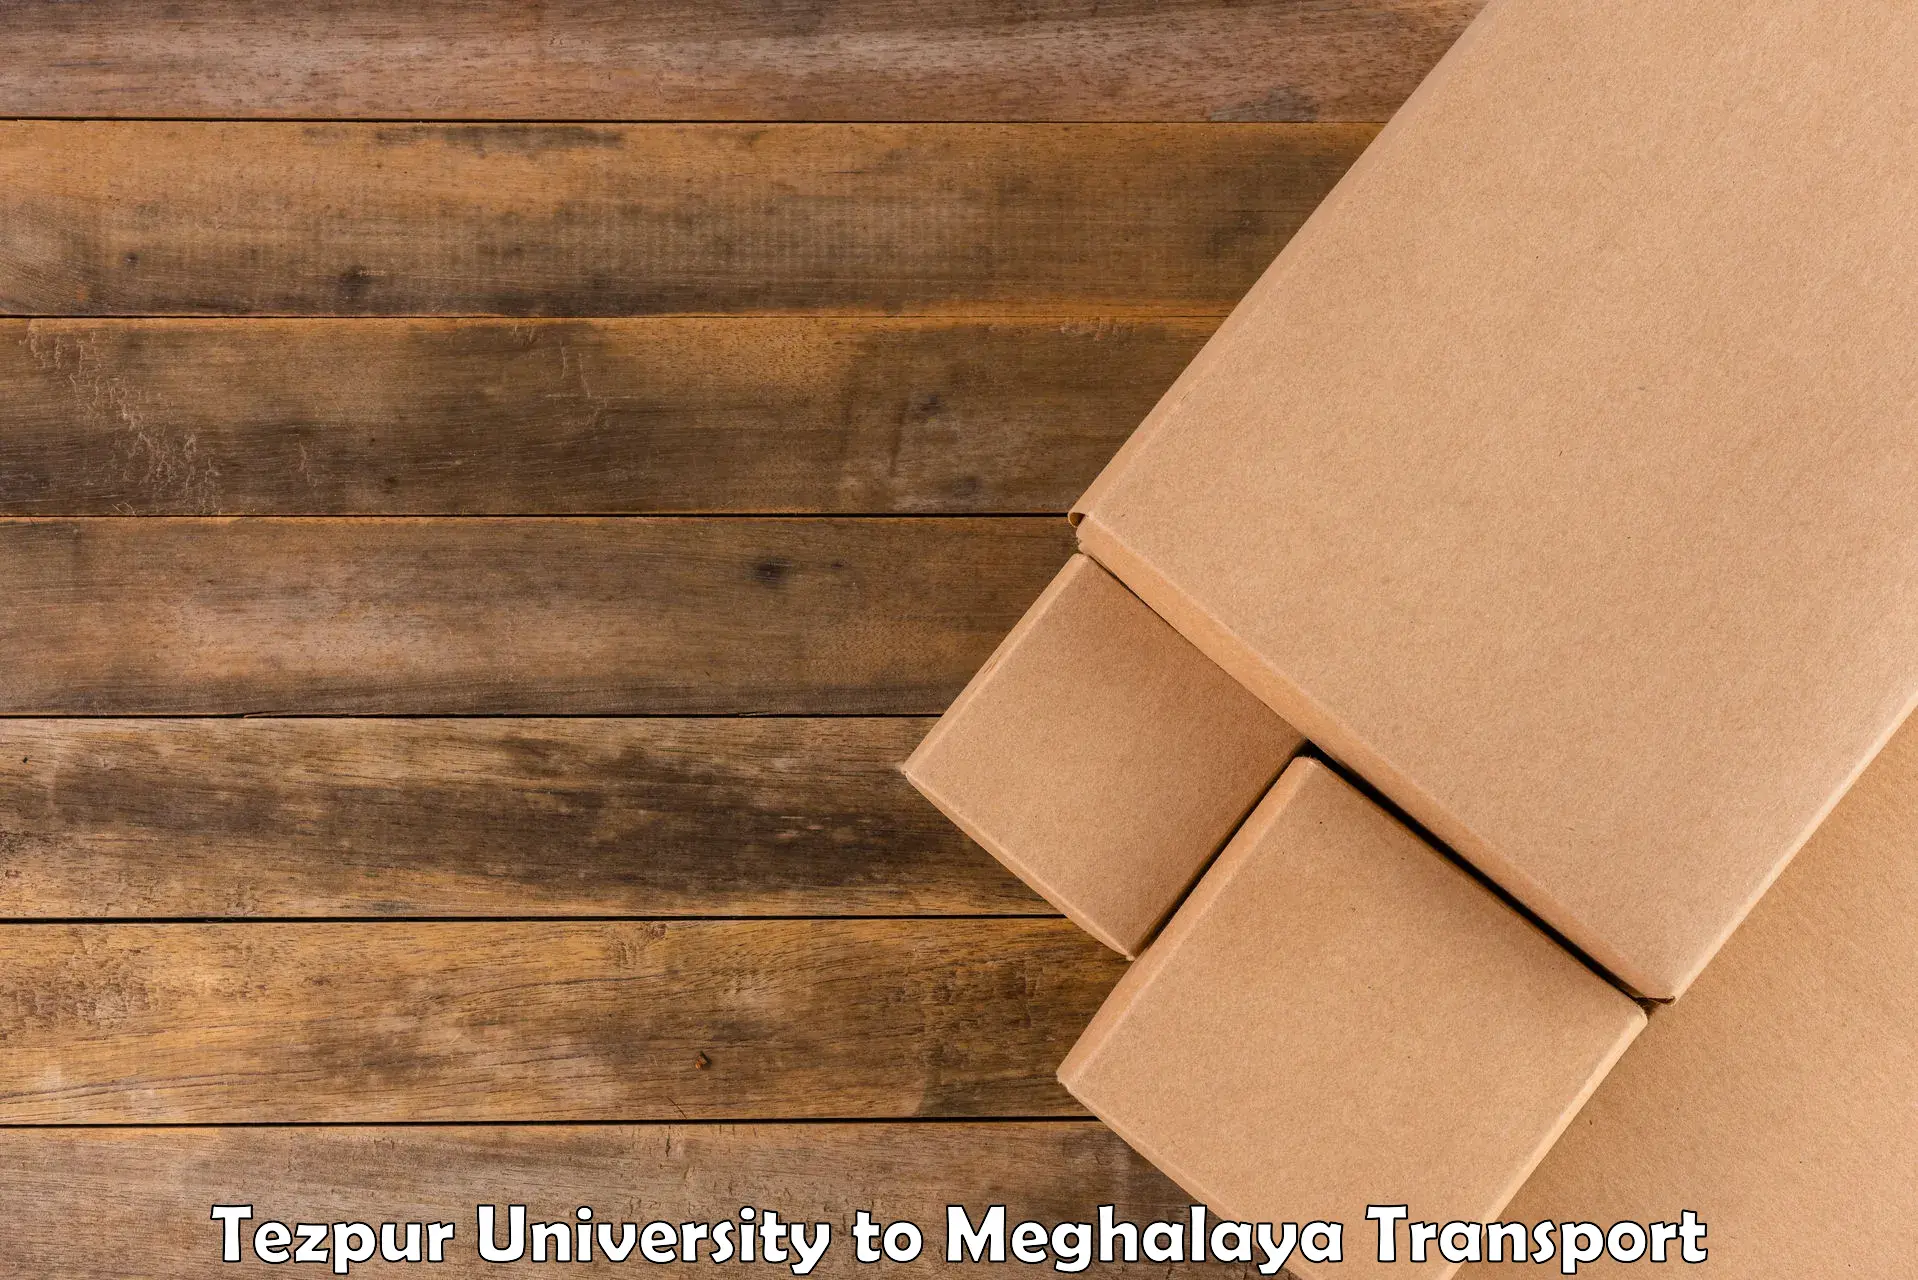 Commercial transport service Tezpur University to Tura